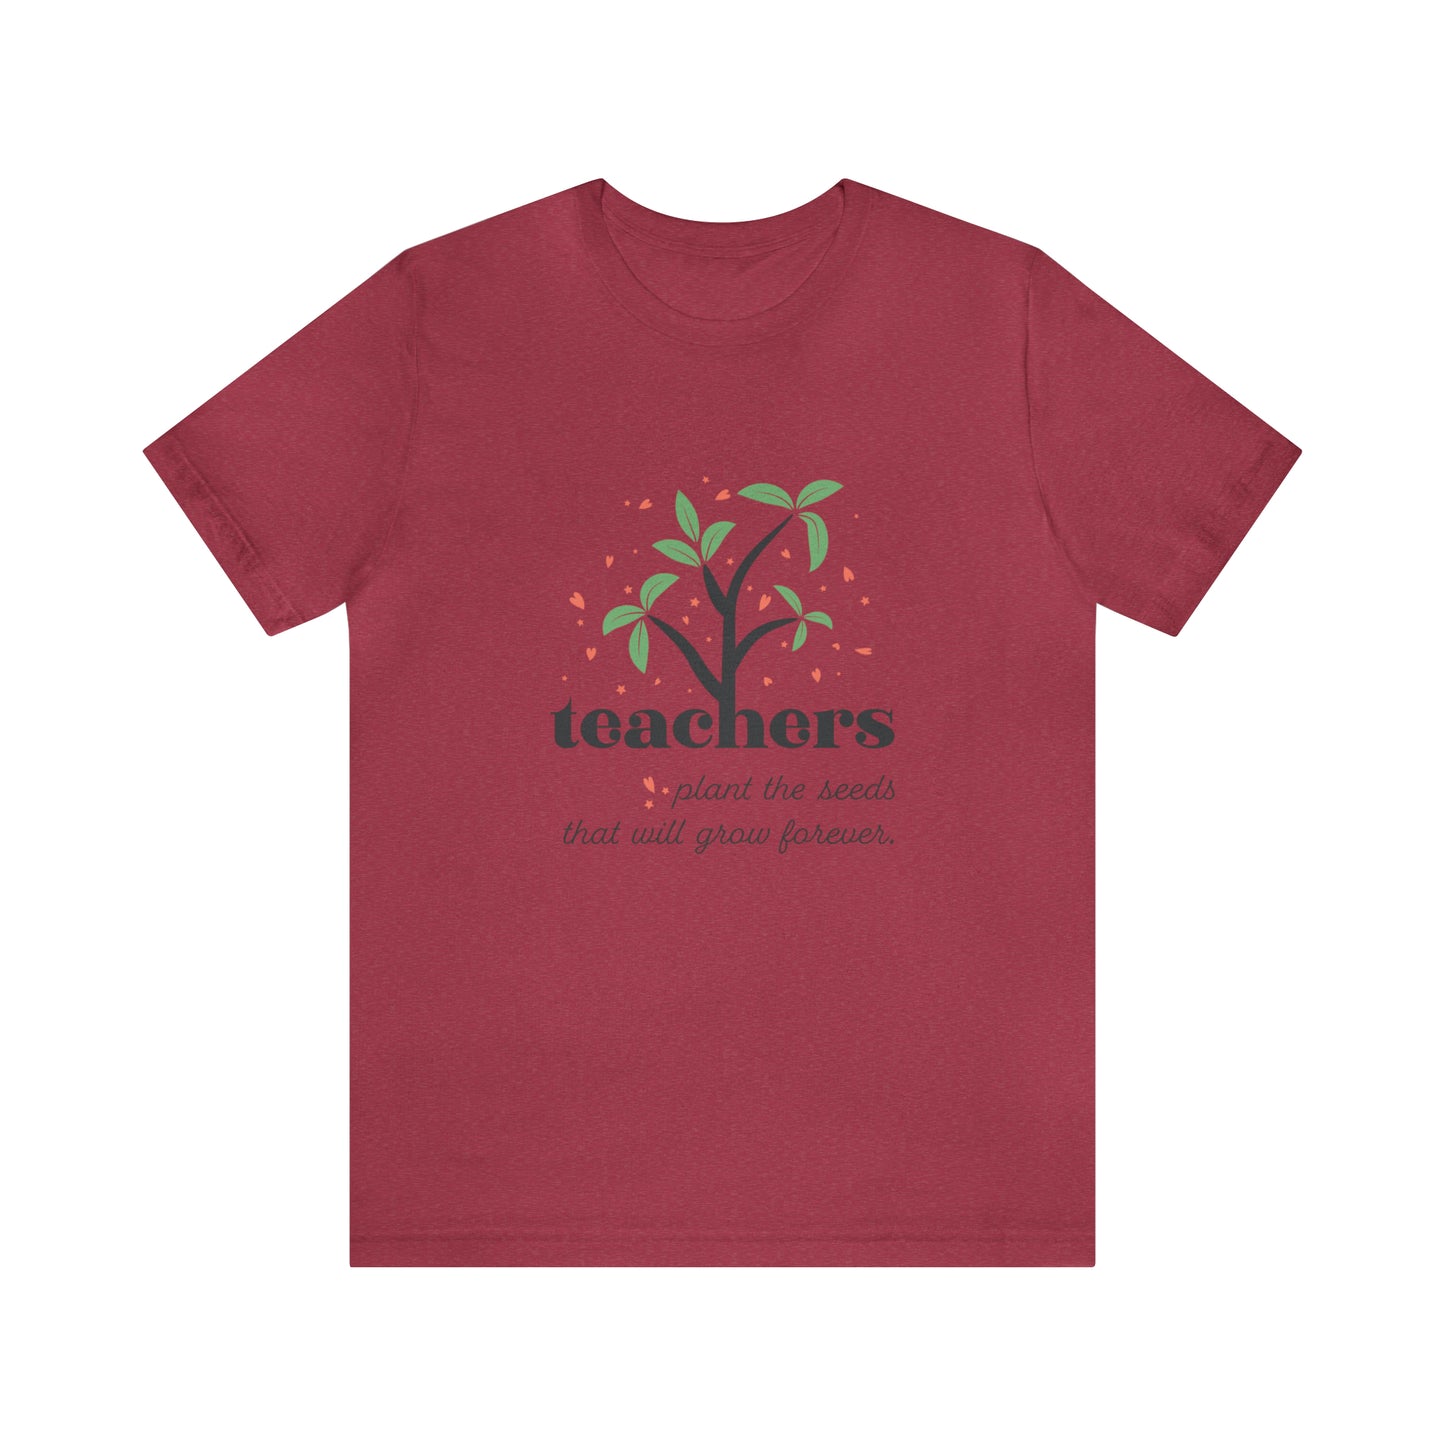 Teachers plant the seeds that will grow forever Short Sleeve Women's Tee